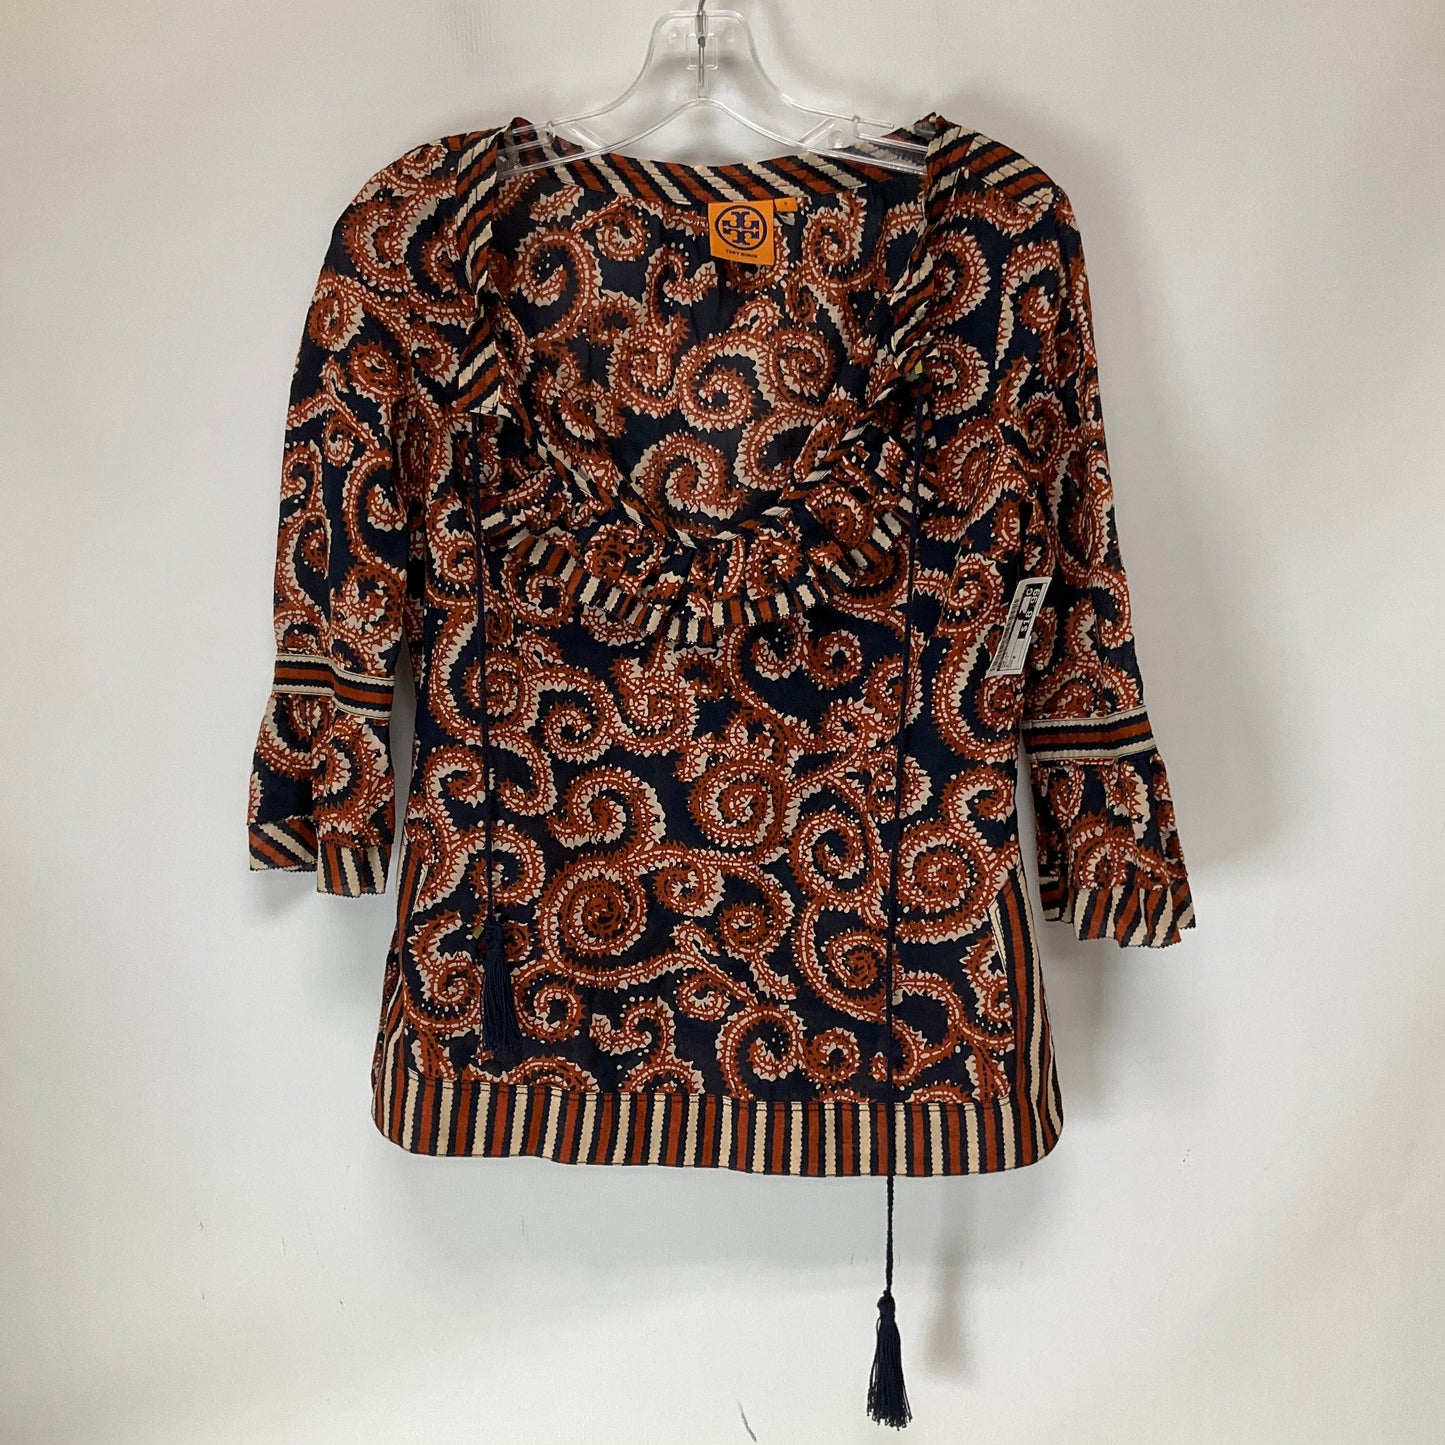 Multi-colored Top Long Sleeve Tory Burch, Size 0